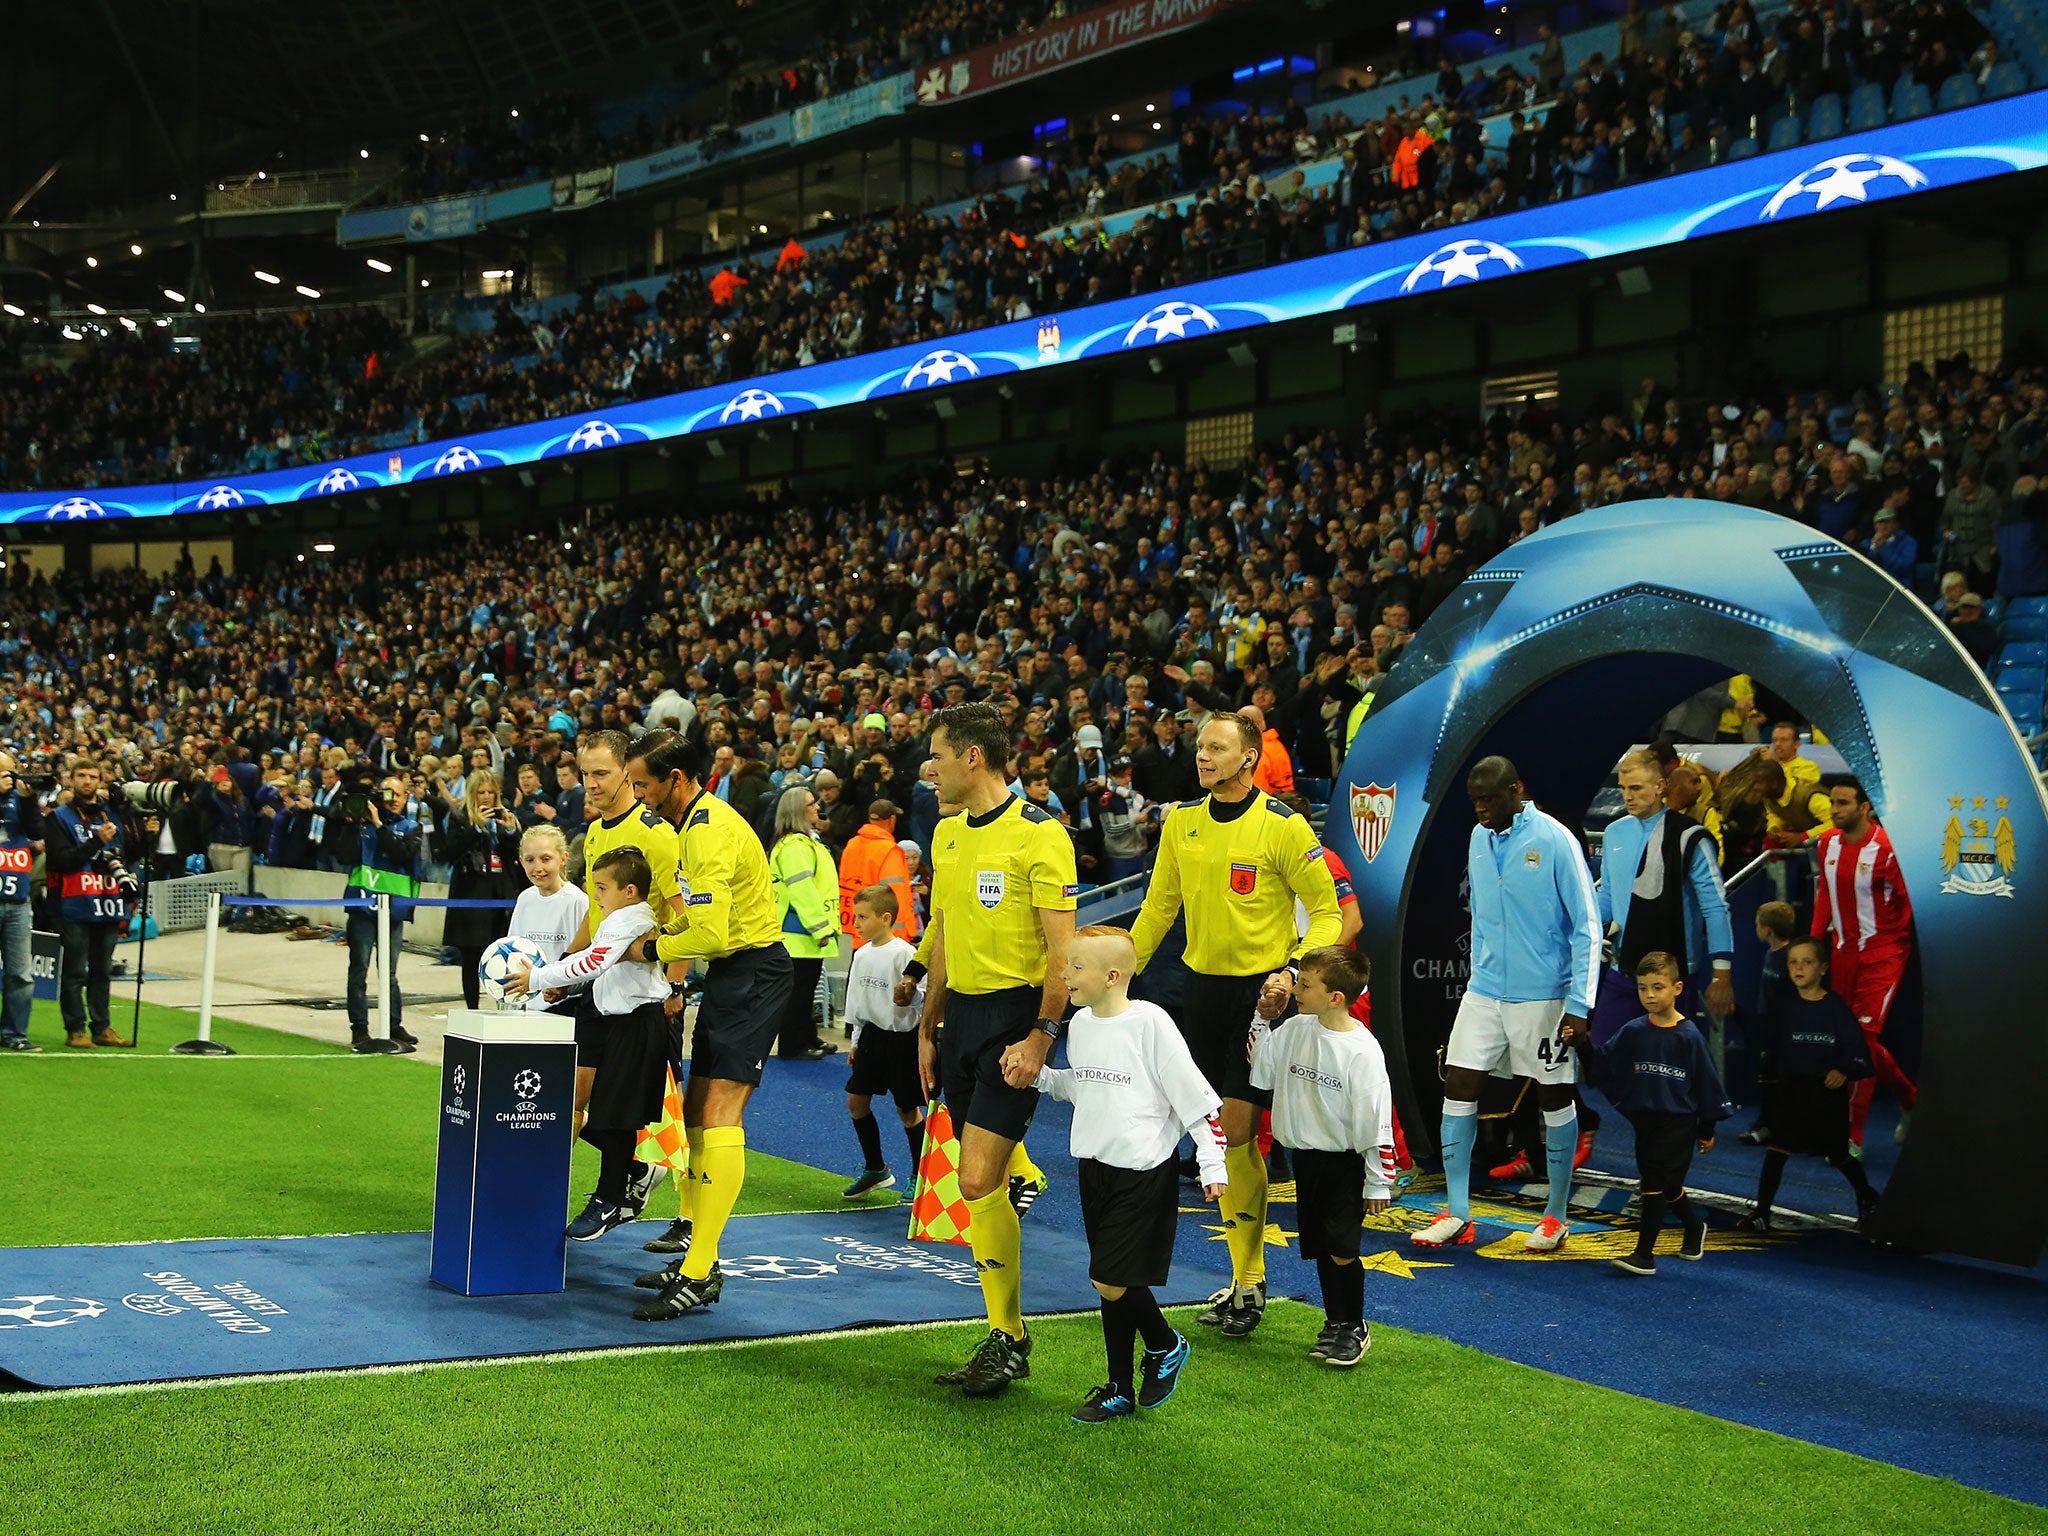 Manchester City had been charged by Uefa for their fans booing the Champions League anthem